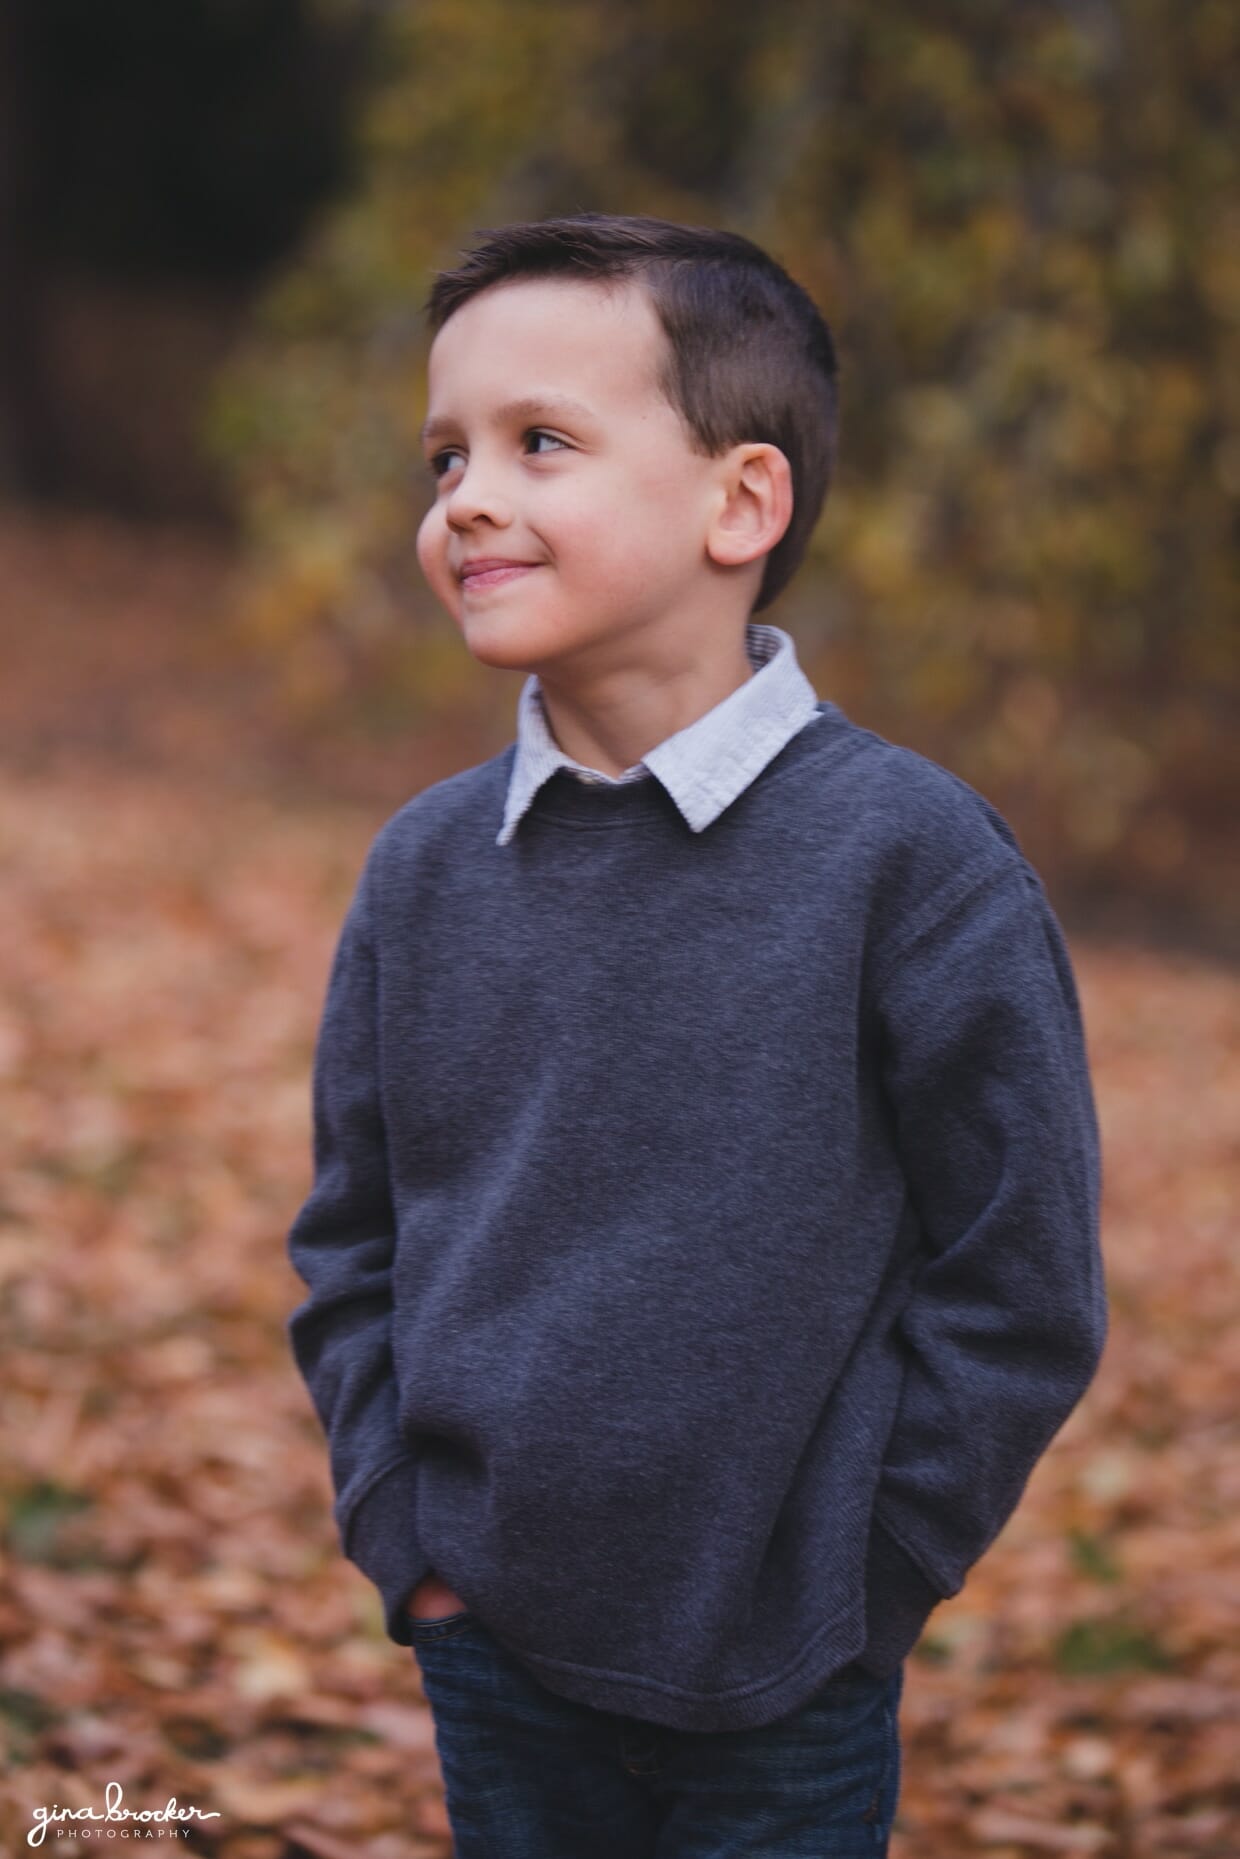 A cute and natural portrait of boy in the park during their fall family photo session in Boston's Arnold Arboretum